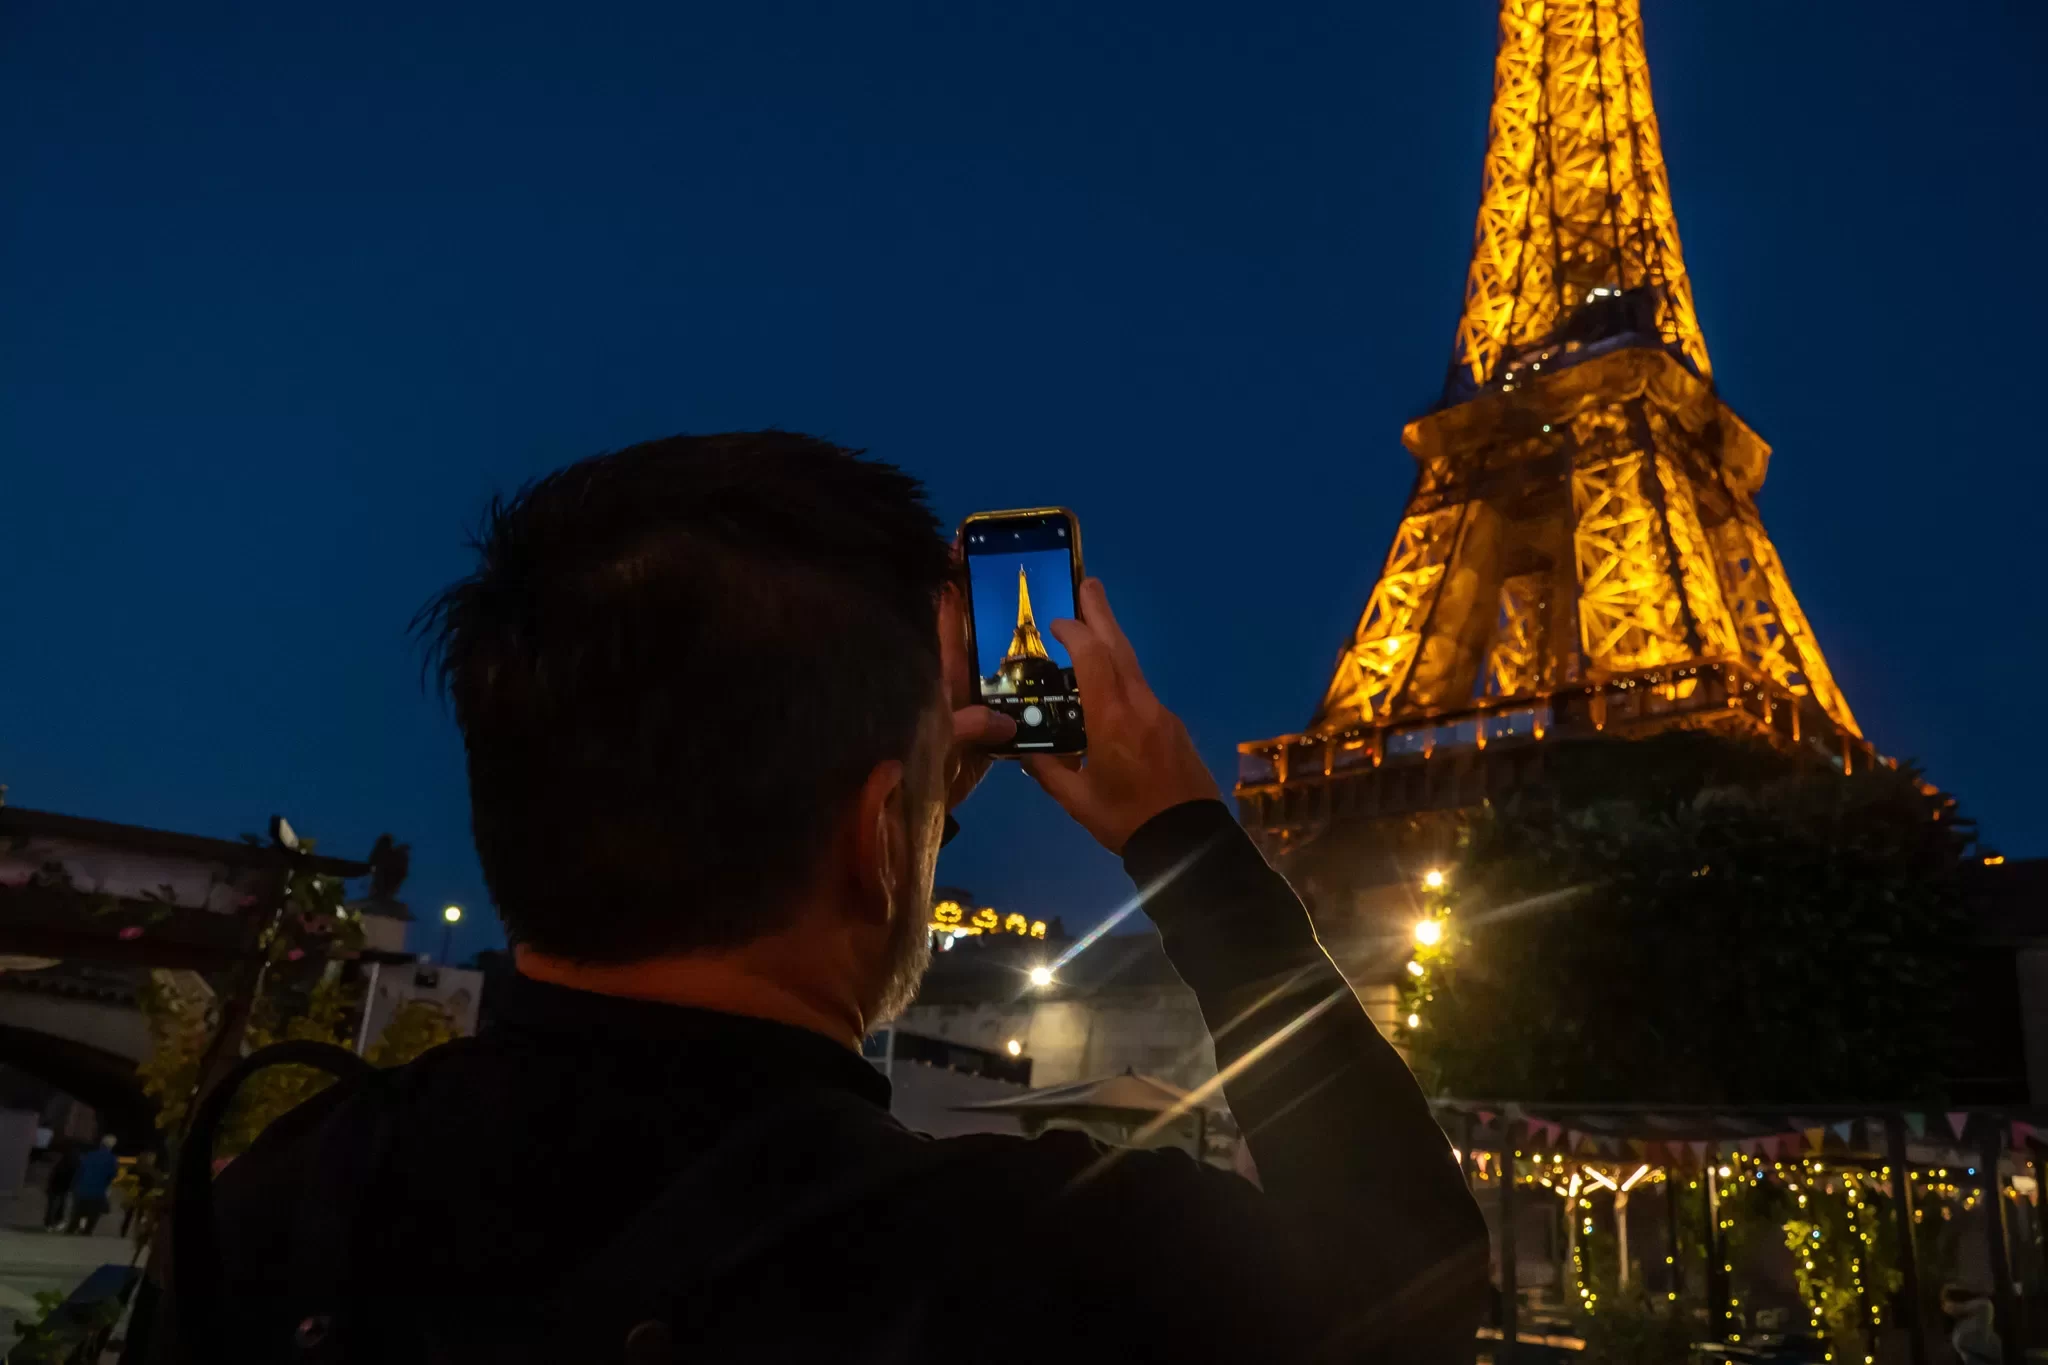 Man taking a photo of the Eiffel Tower at night